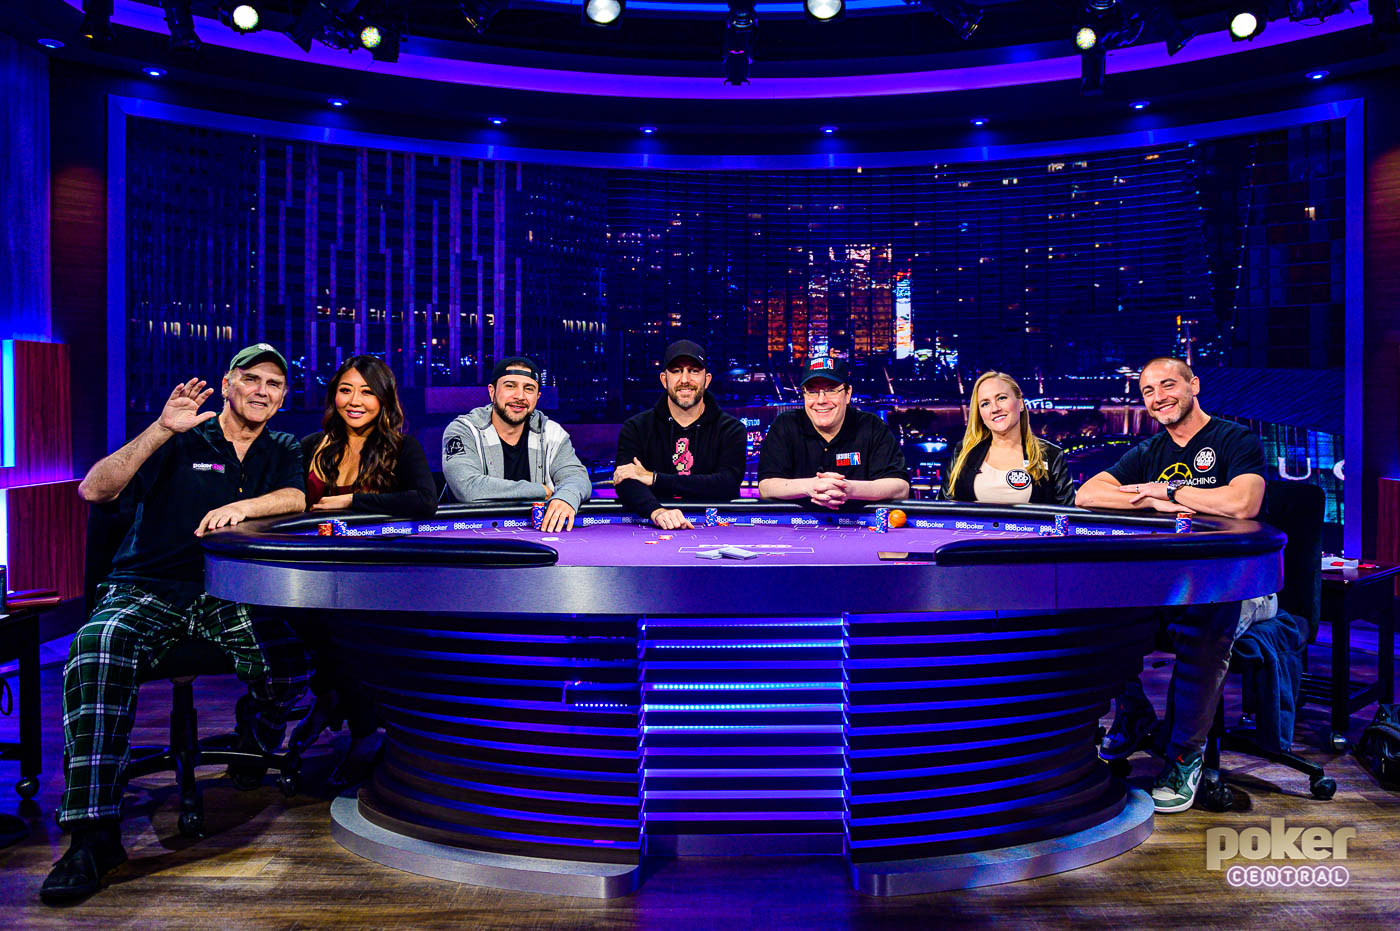 Night 1 of Showbound week on Poker After Dark featured Norm Macdonald, Maria Ho, Garry Gates, Chance Kornuth, Jamie Gold, and Jamie Kerstetter alongside qualifier Woody Kaawar.